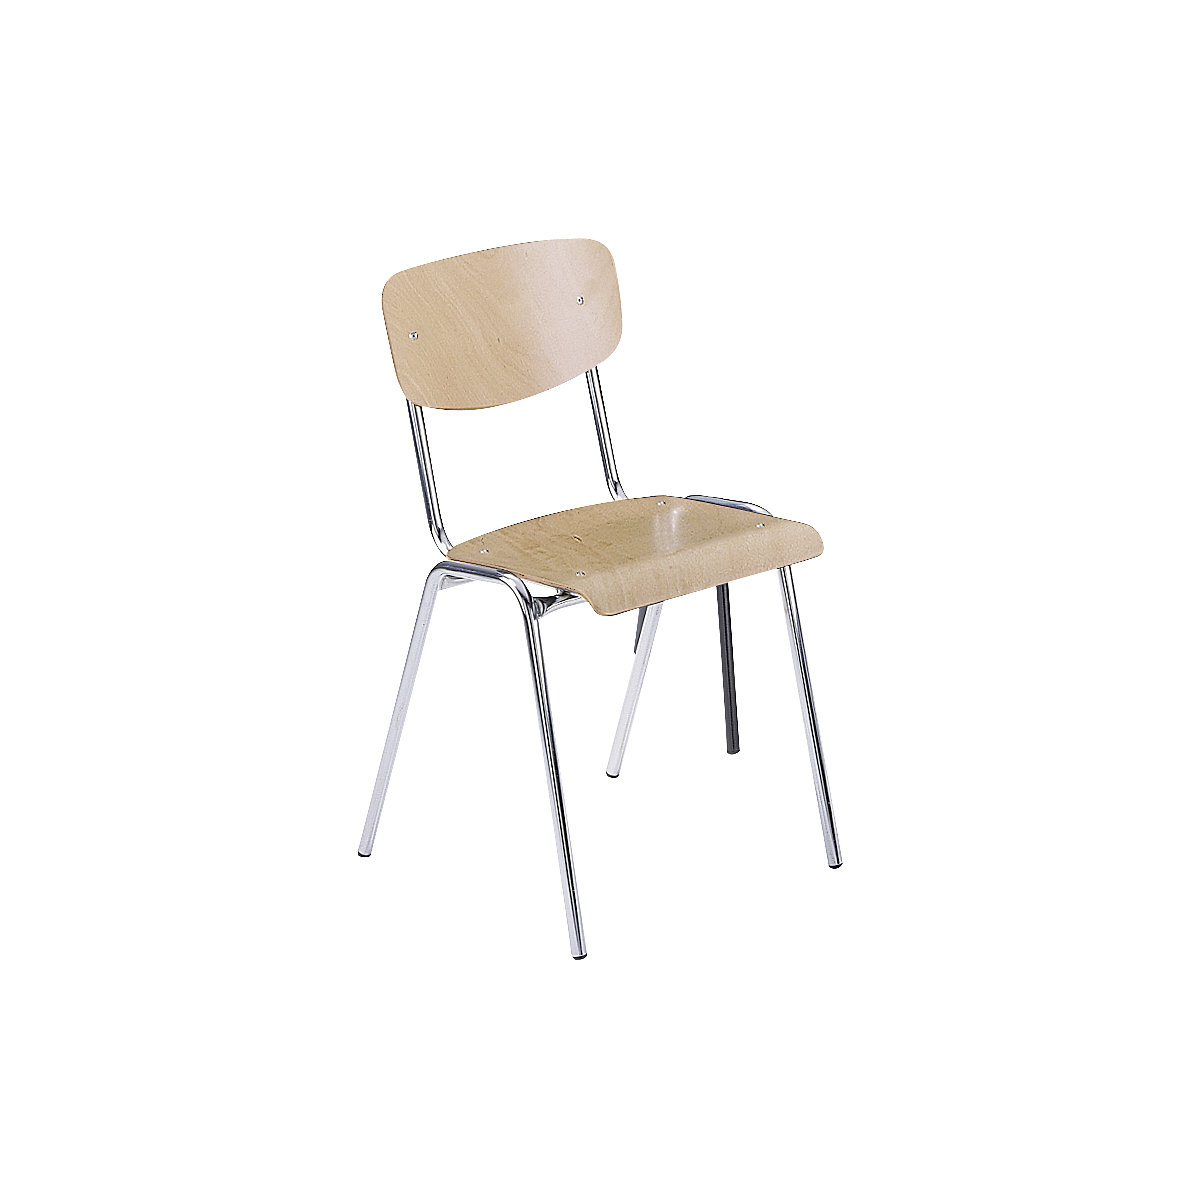 CLASSIC stacking chair